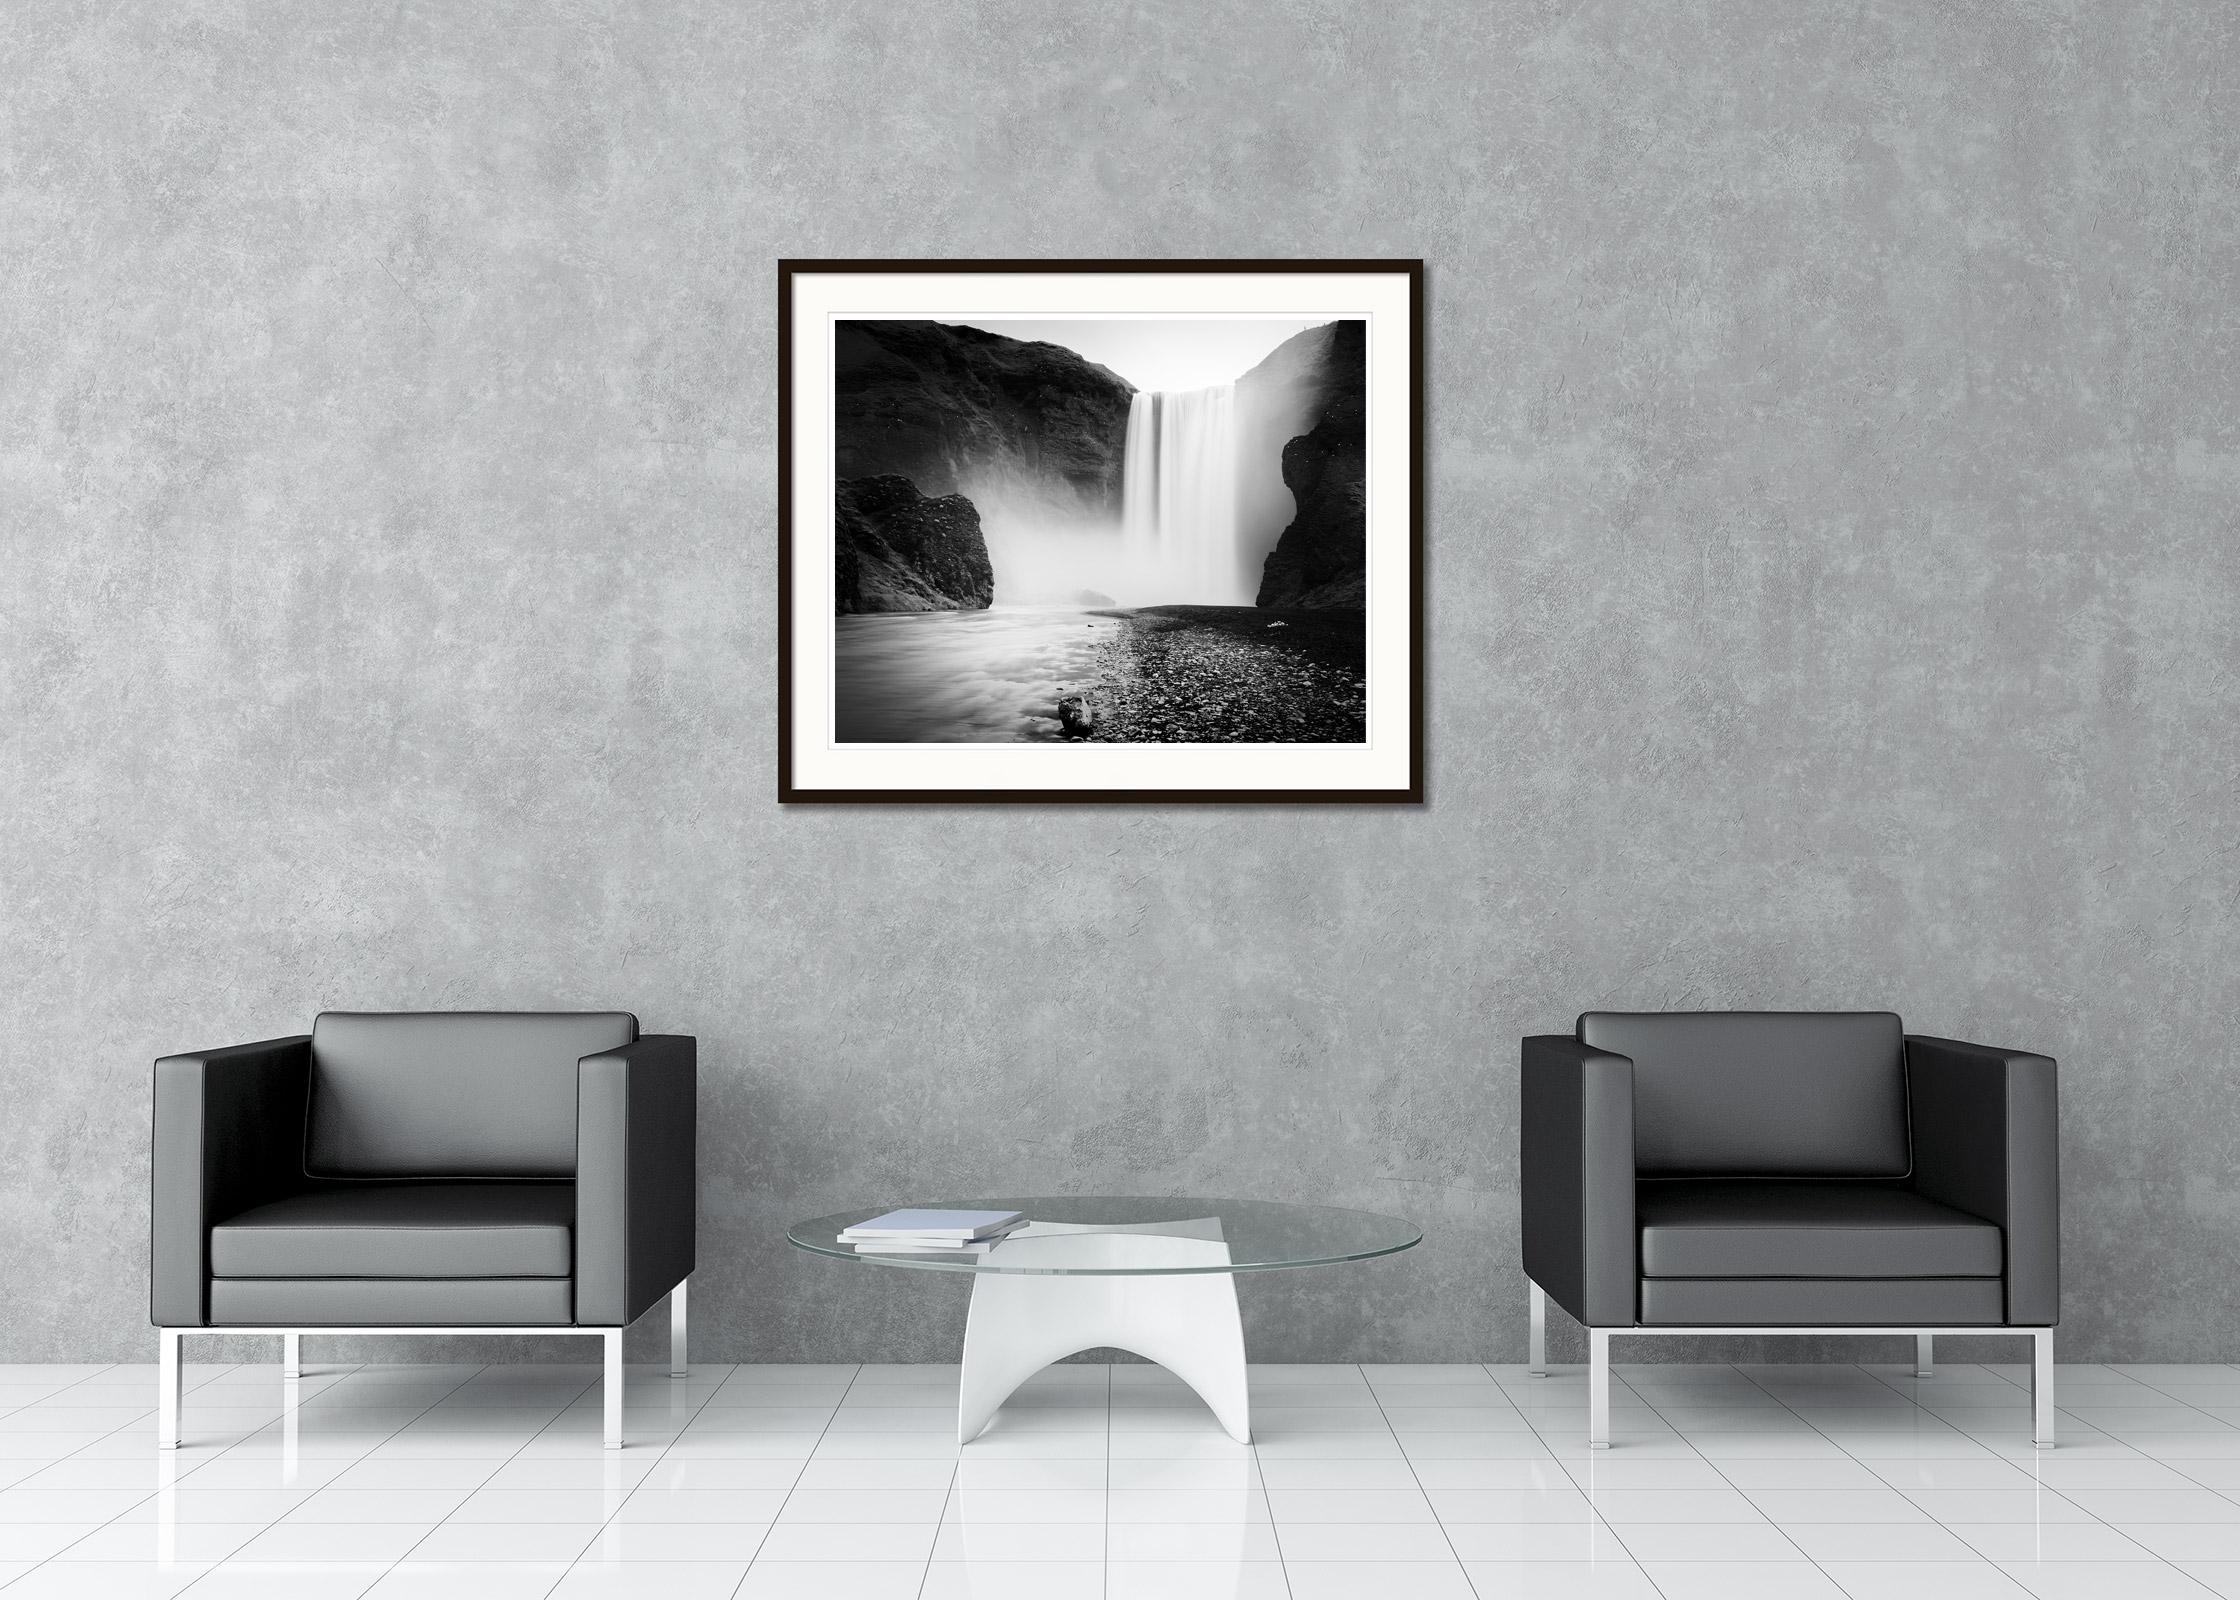 Black and white fine art long exposure waterscape - landscape photography. Skogafoss gigantic waterfall, Iceland. Archival pigment ink print, edition of 7. Signed, titled, dated and numbered by artist. Certificate of authenticity included. Printed